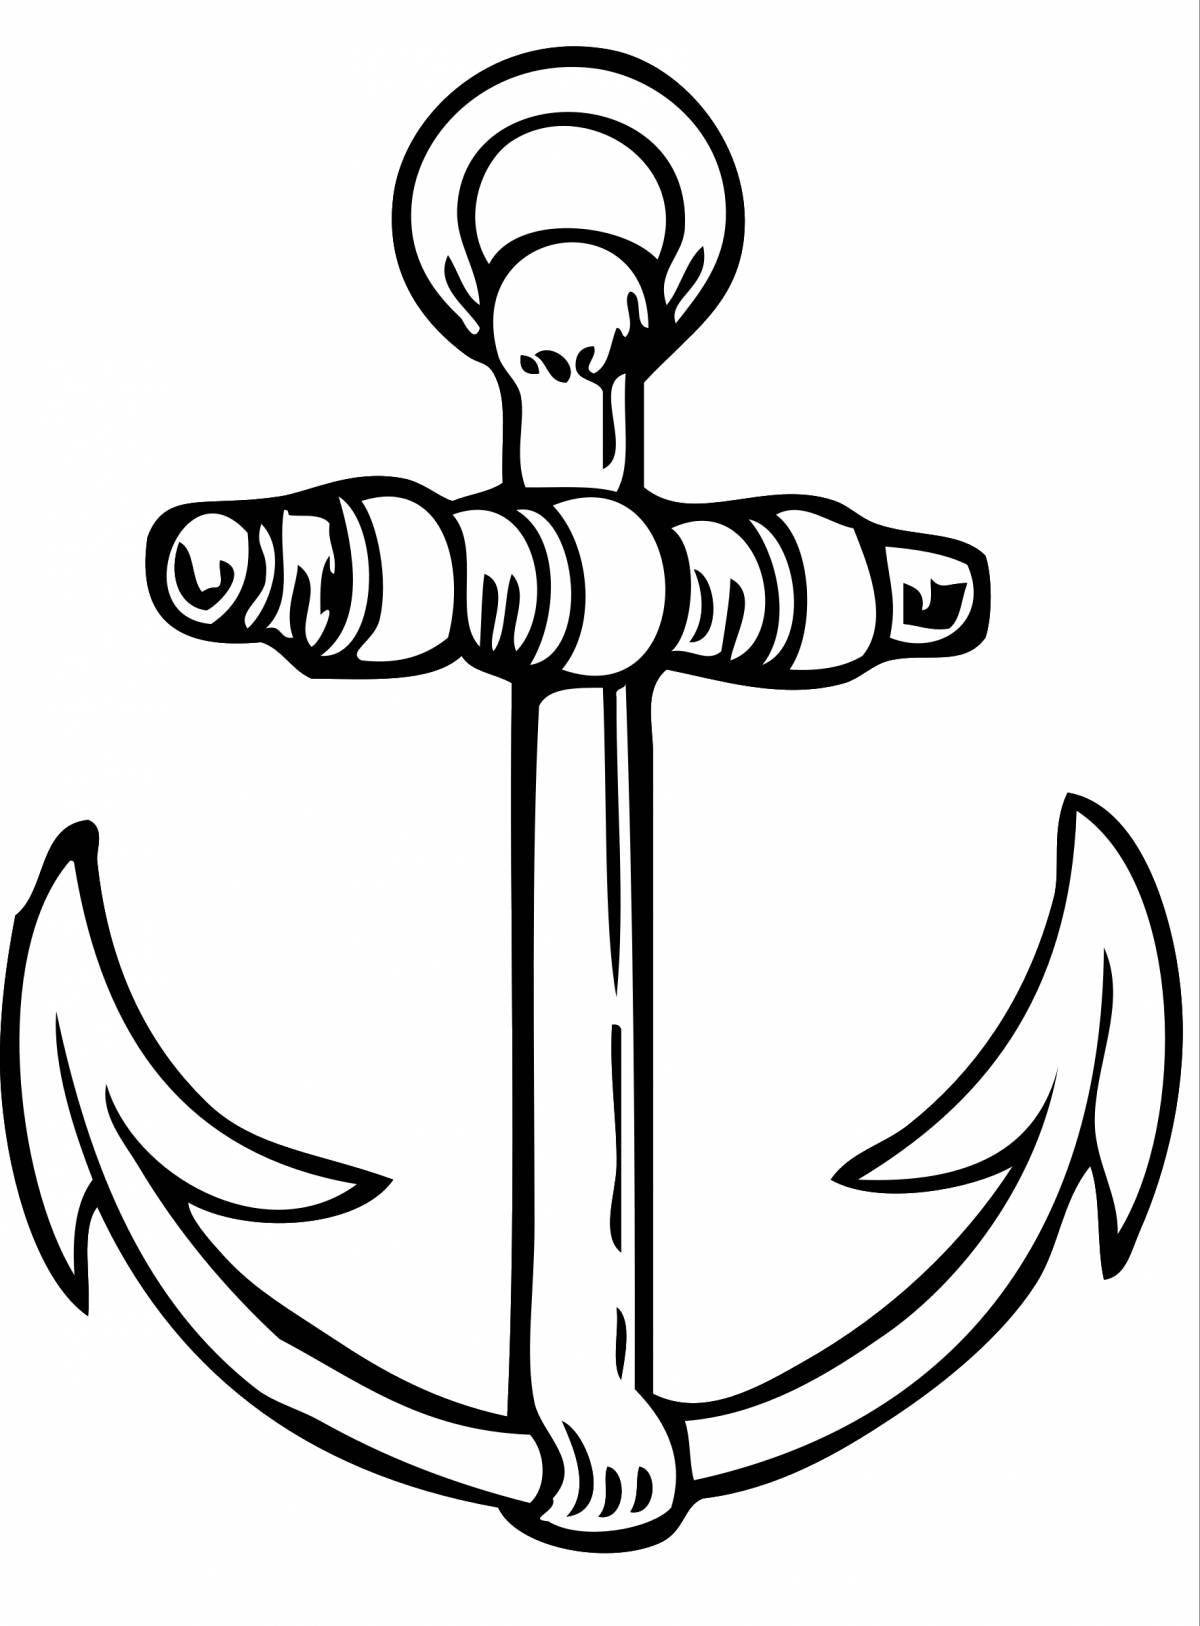 Colorful anchor coloring book for kids